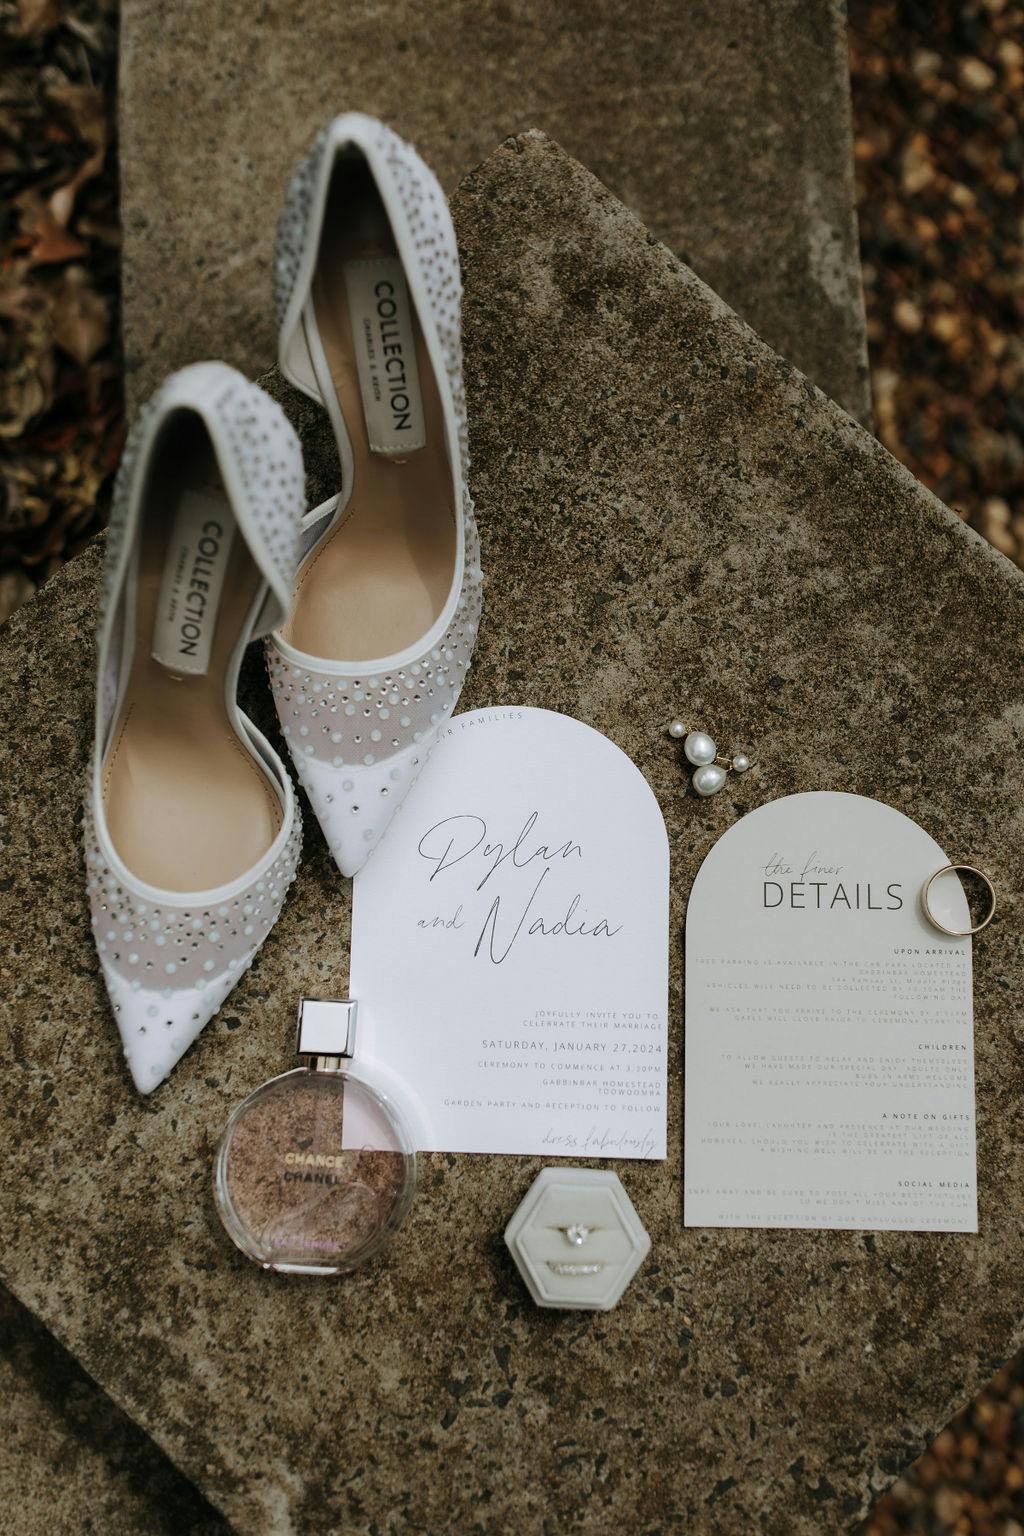 A pair of white, embellished high-heeled shoes is placed on a stone surface next to a wedding invitation that reads "Dylan and Nadia," pearl earrings, a ring, a small perfume bottle, a hexagonal ring box, and a wedding event details card.